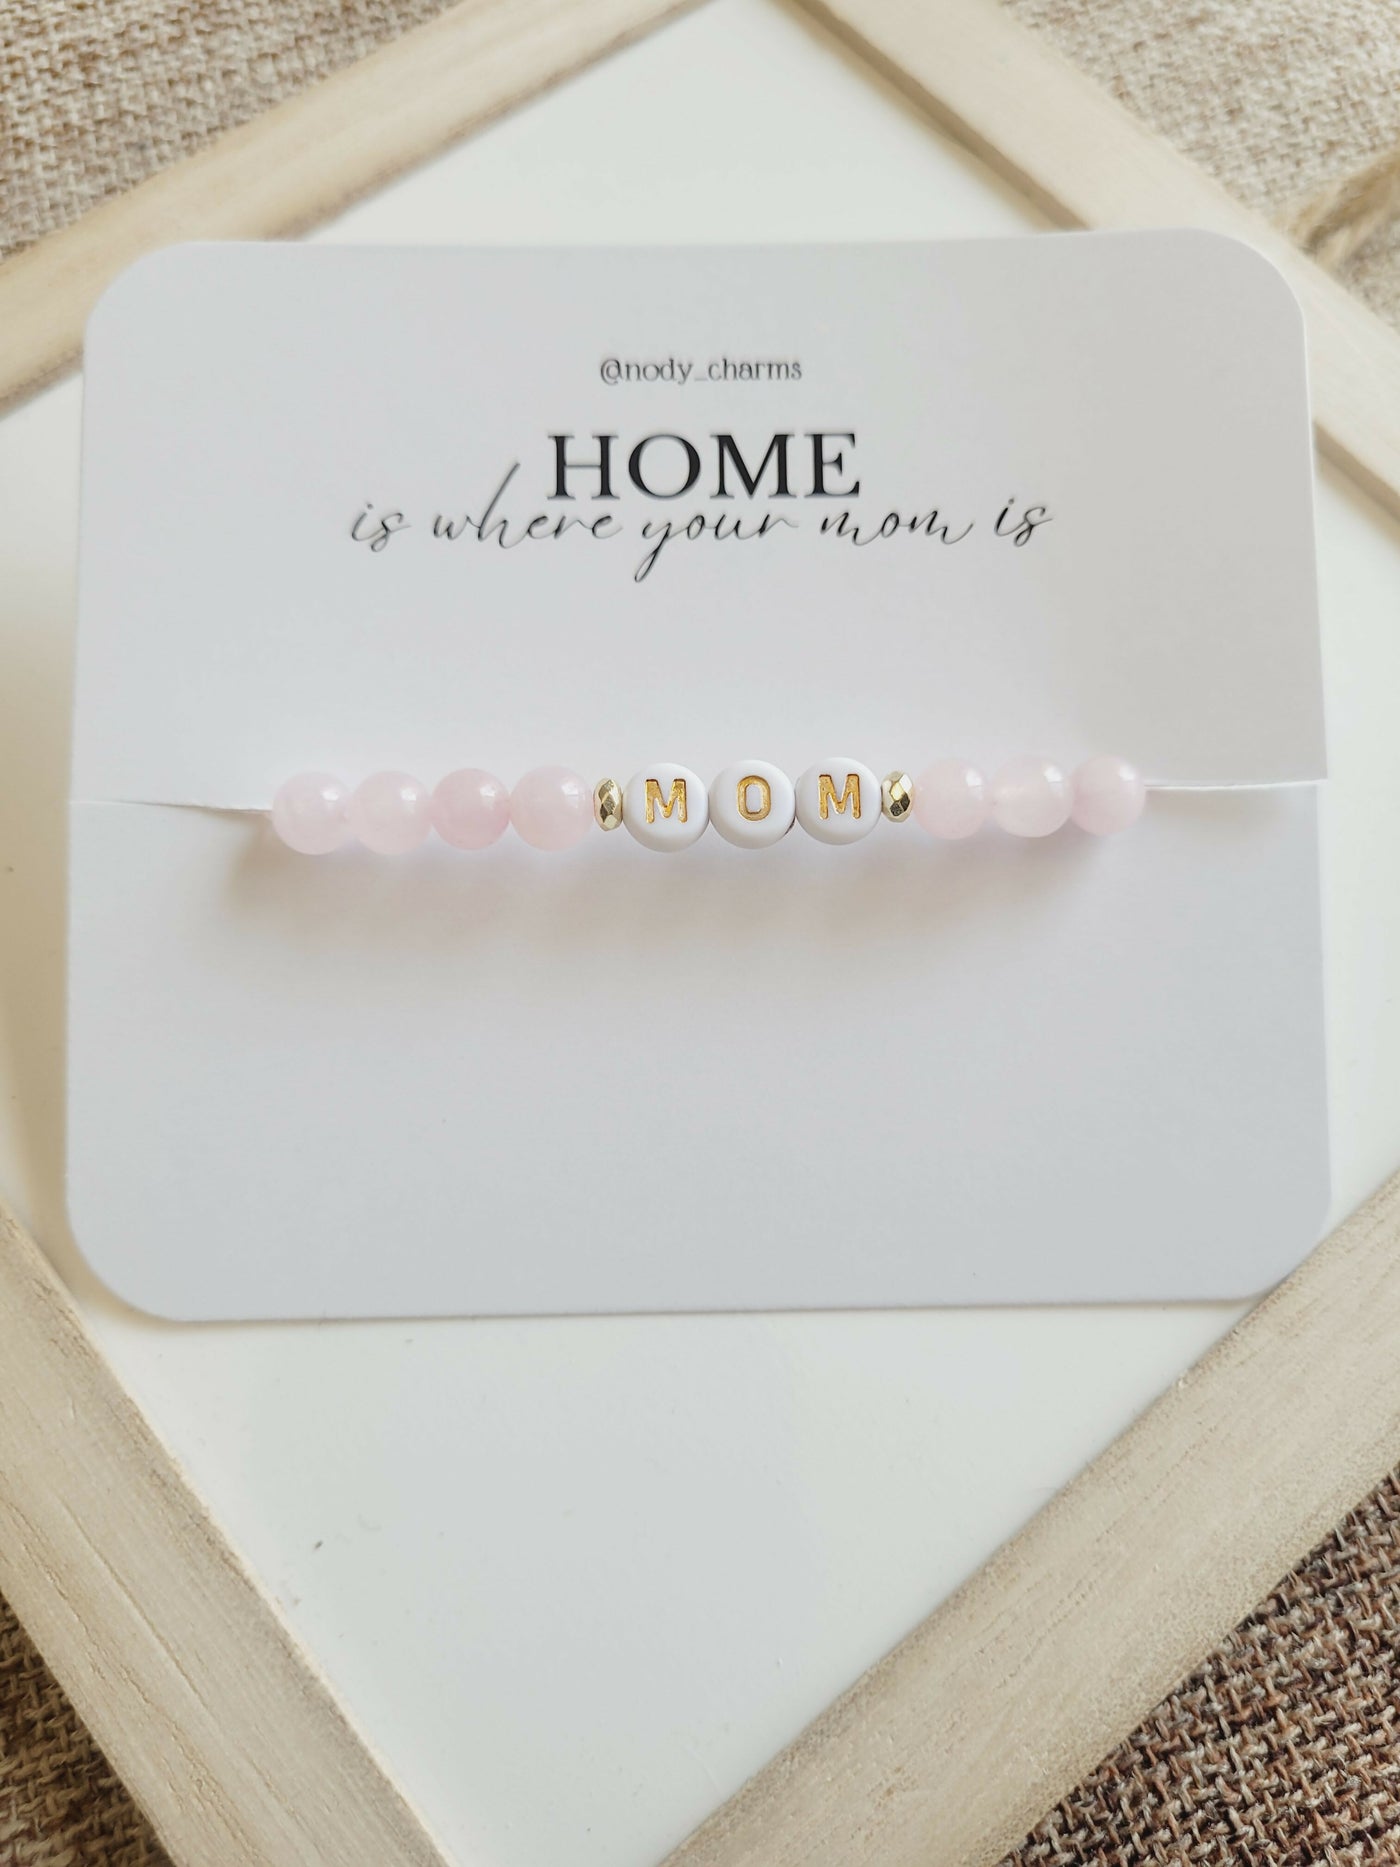 Home is Where your Mom is Beaded Bracelet